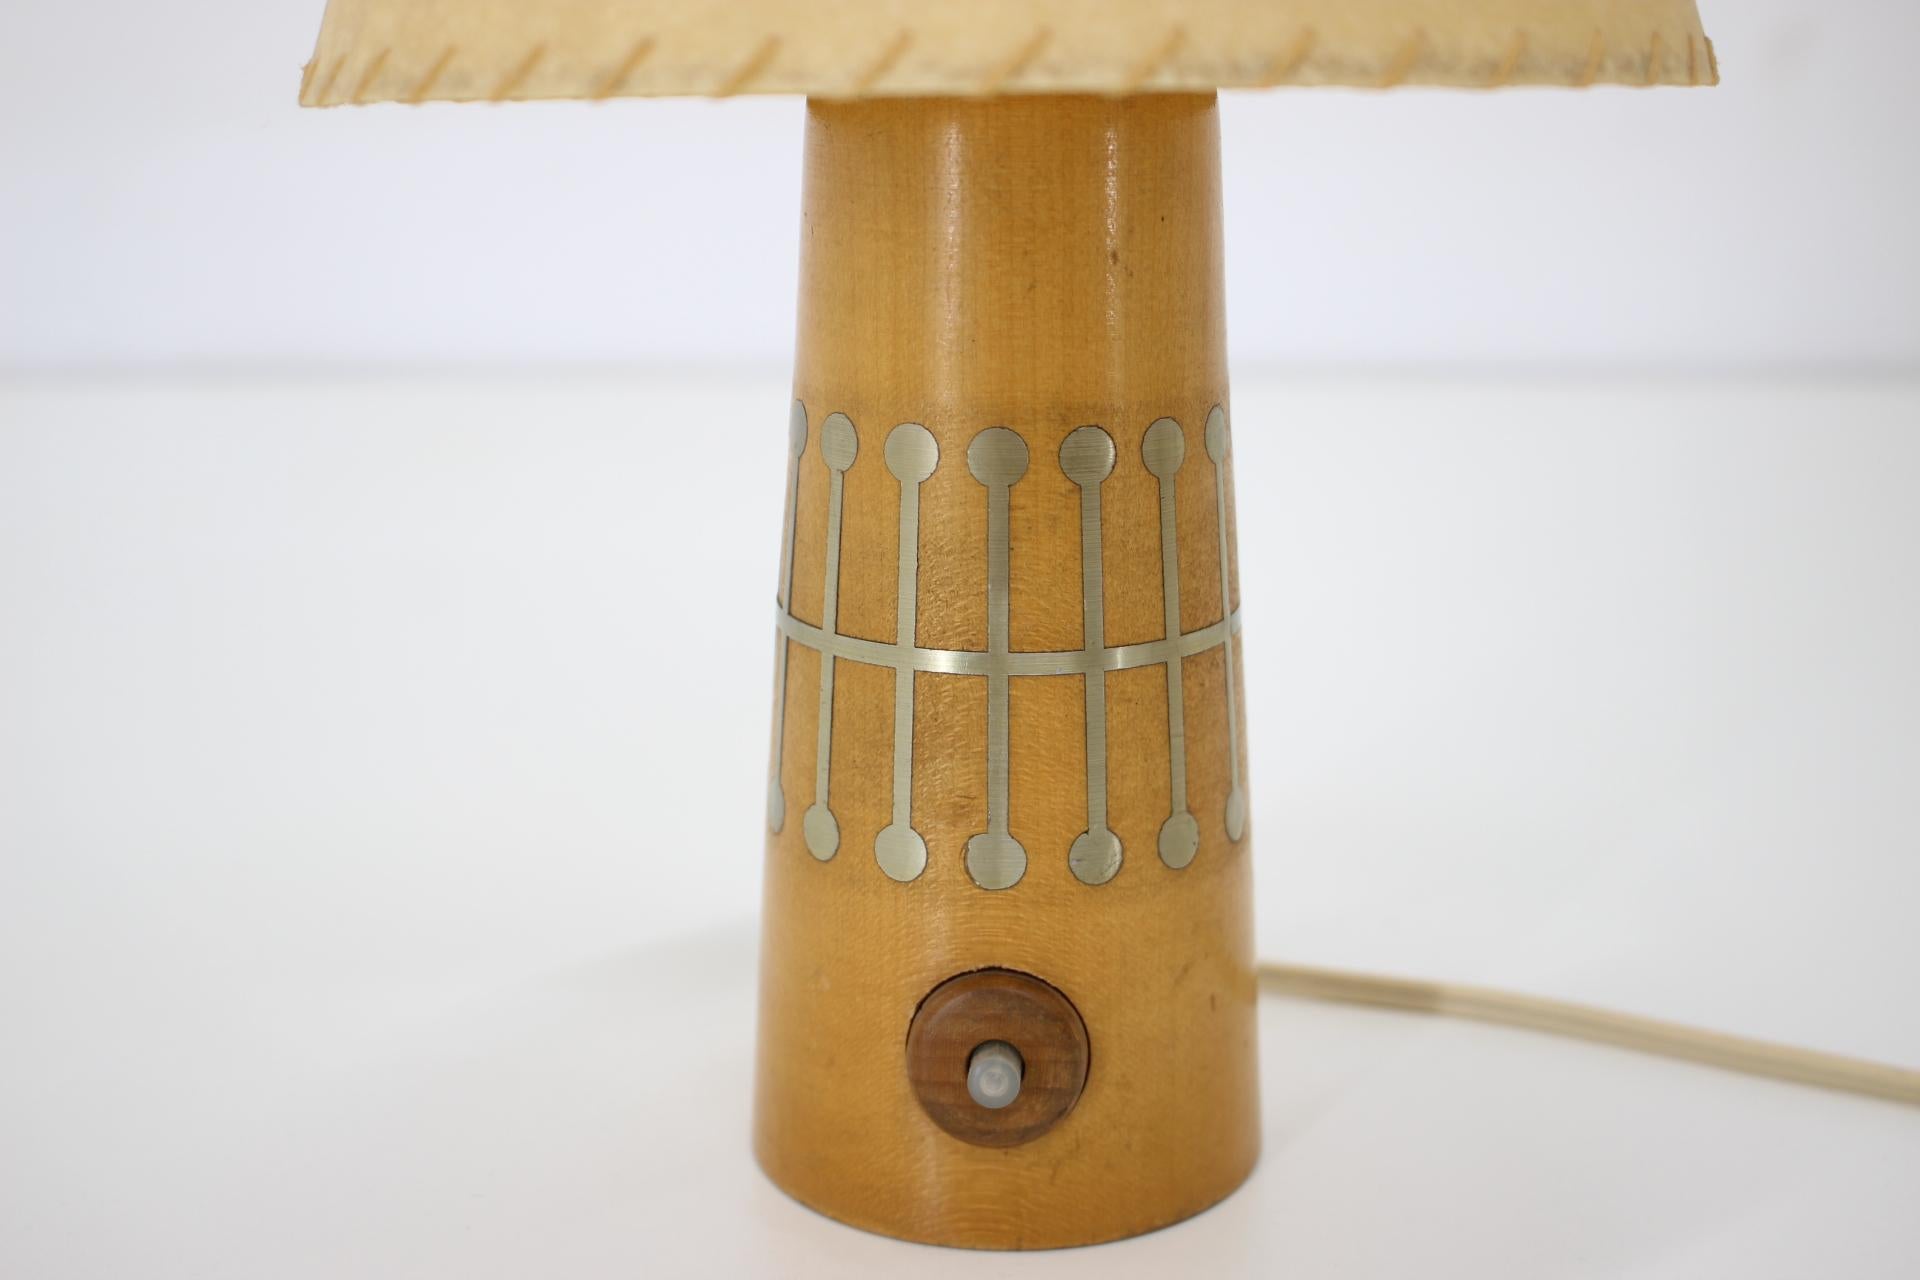 - Made in Czechoslovakia
- Made of wood, pergamen lampshade
- Fully functional
- Very good, original condition.